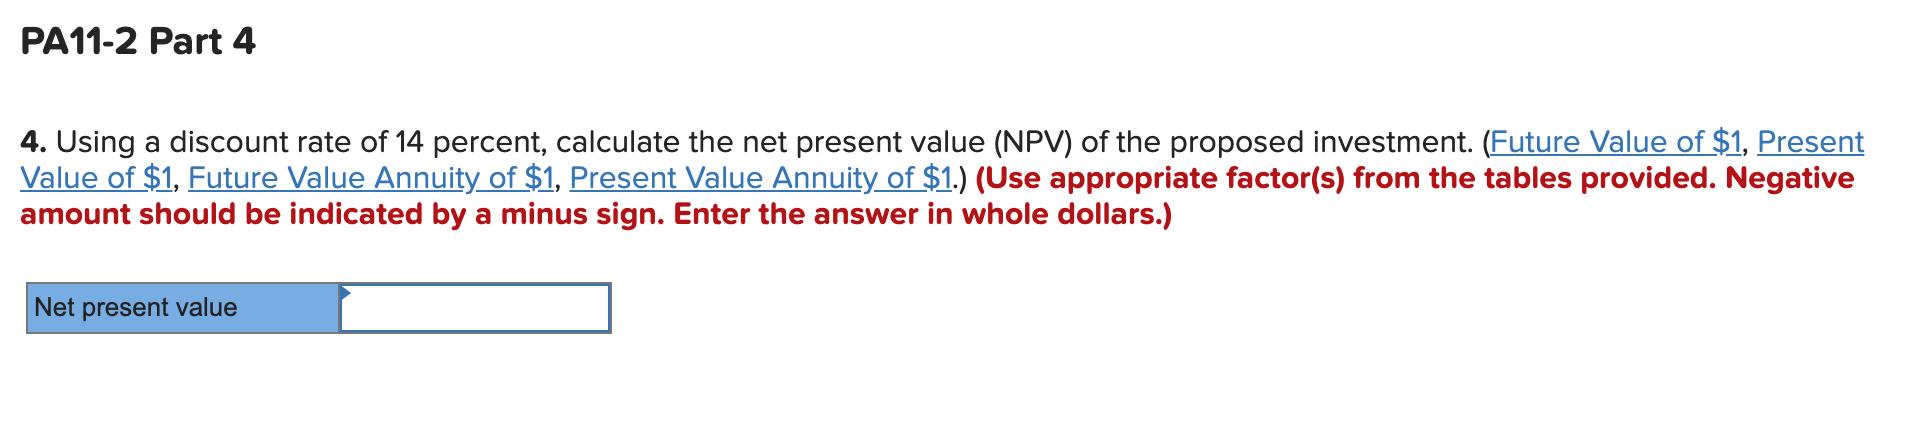 PA11-2 Part 4 4. Using a discount rate of 14 percent, calculate the net present value (NPV) of the proposed investment. (Futu